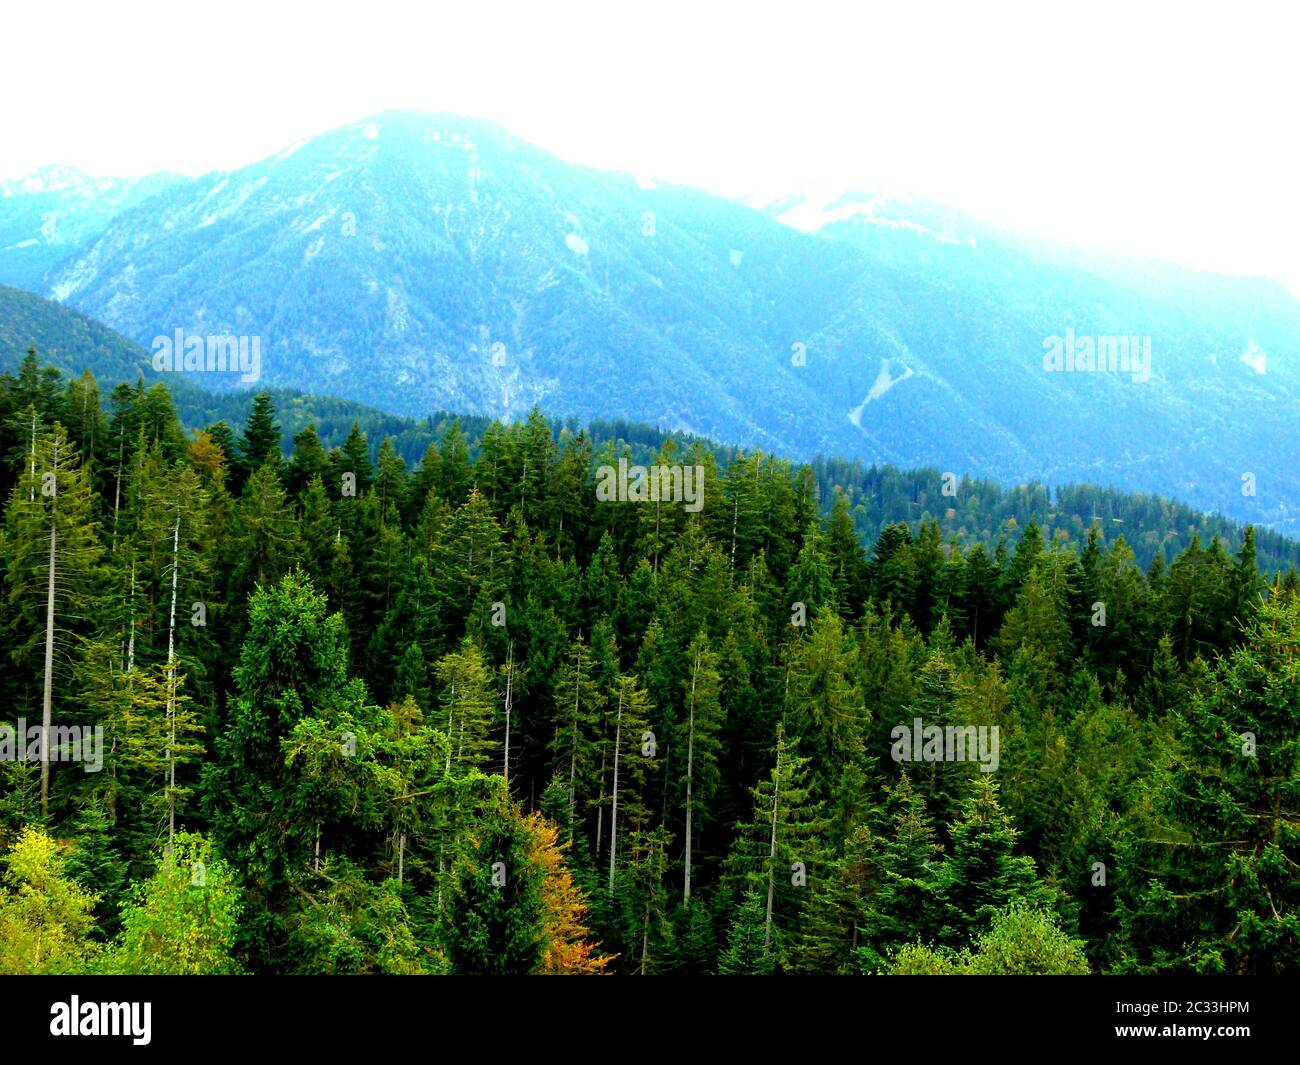 coniferous forest in autumn with mountains in bluish haze in background 1 Stock Photo